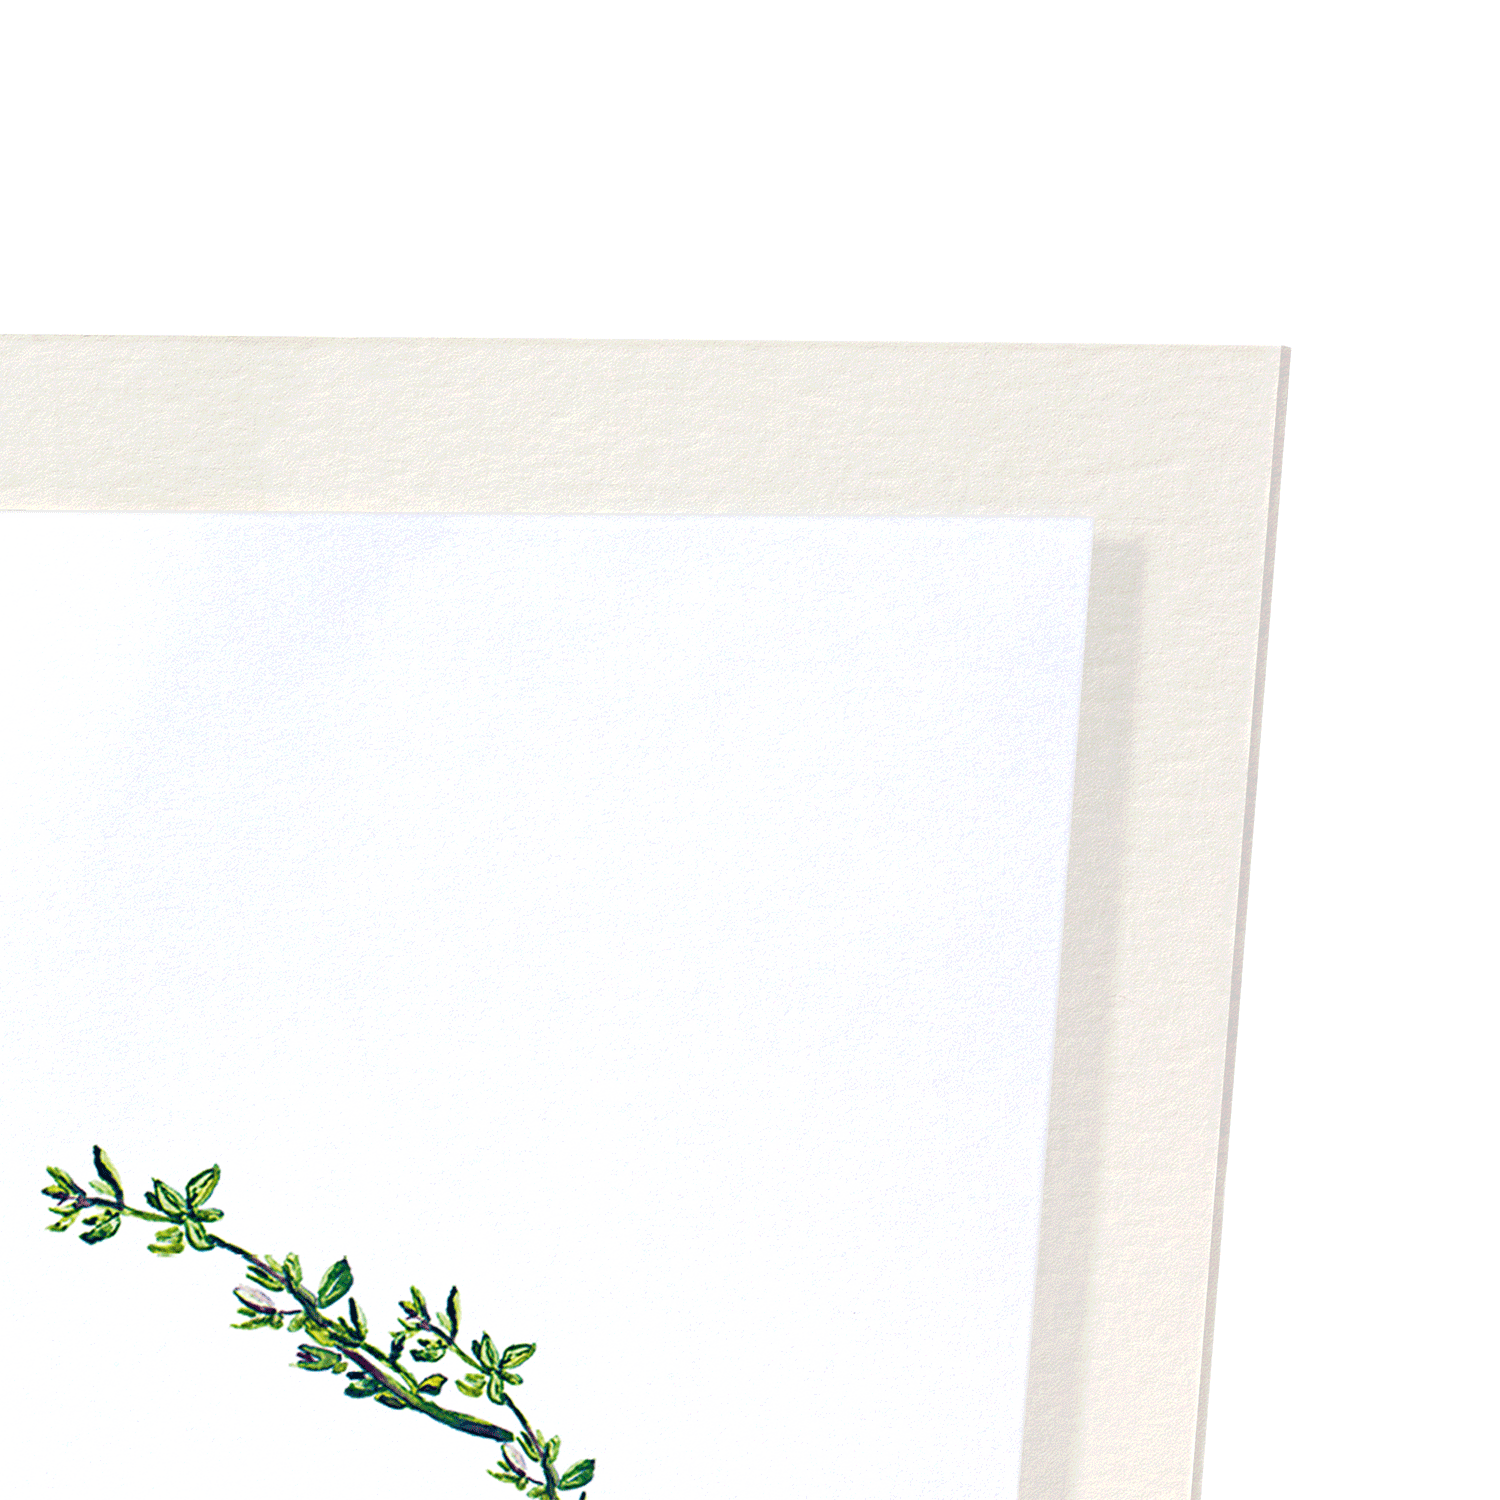 SPEND THYME WITH YOU: Watercolour Art Print